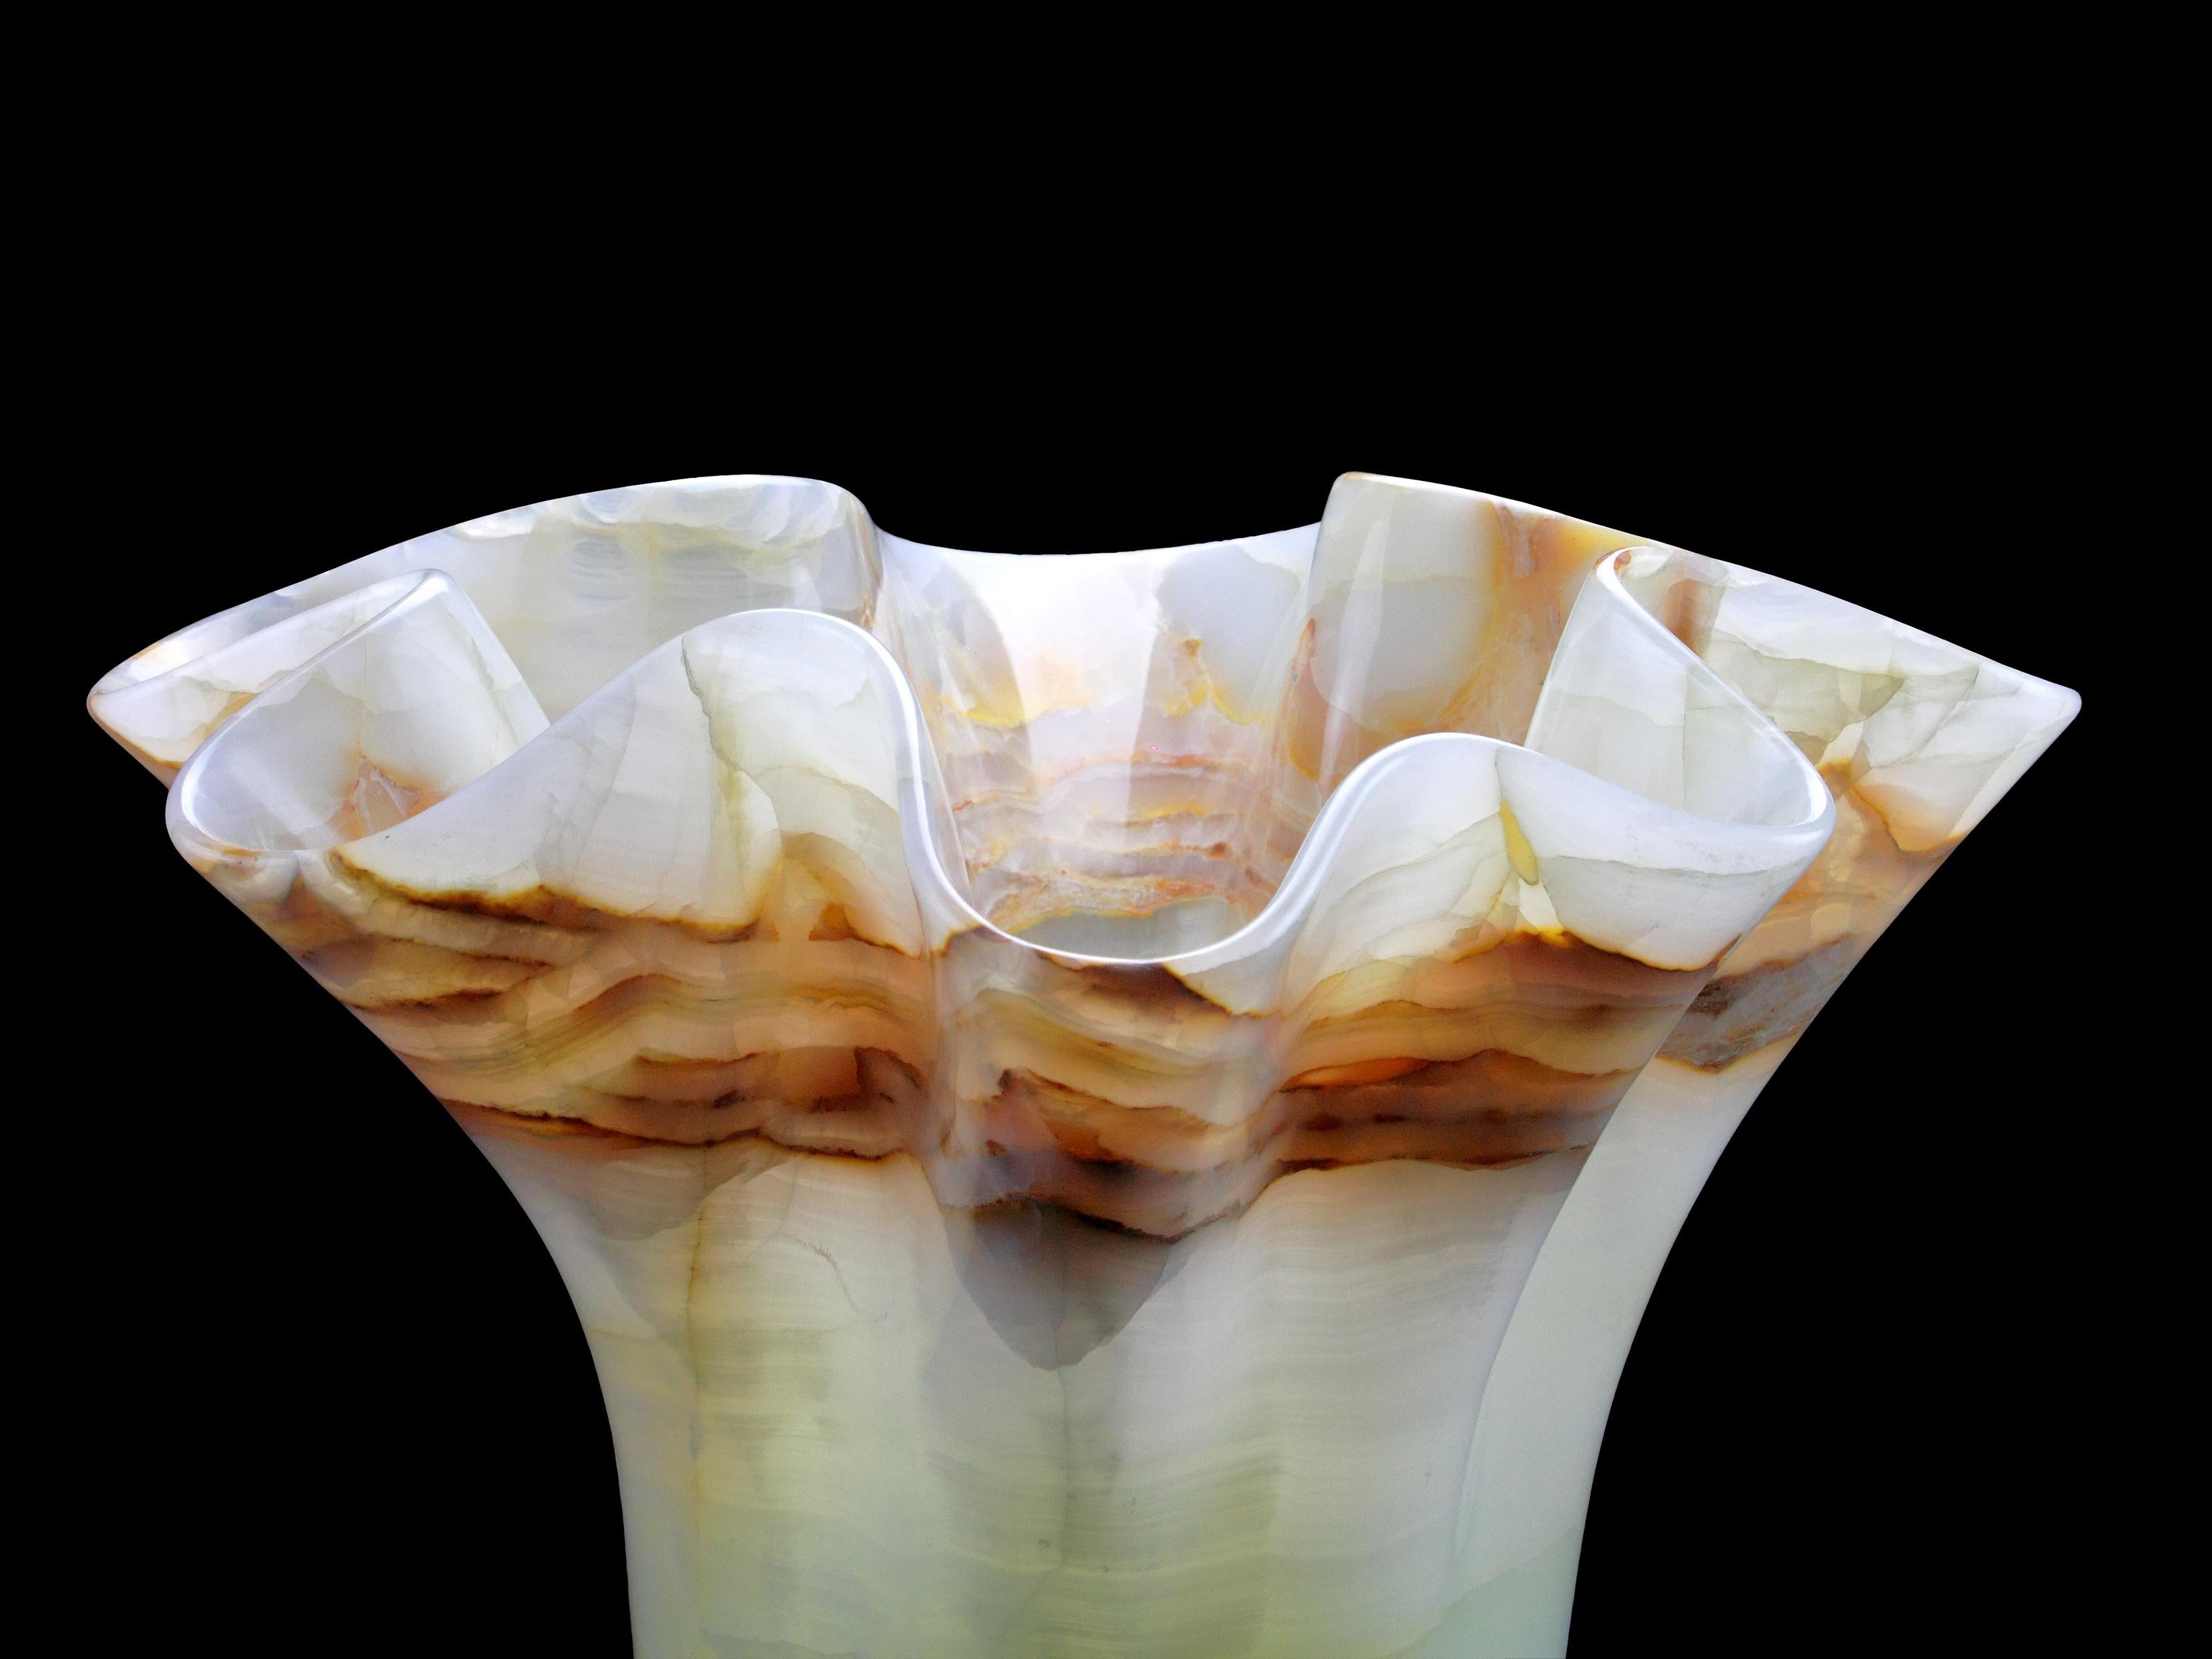 Vase Vessel Sculpture Organic Shape White Onyx Marble Collectible Design Italy For Sale 4